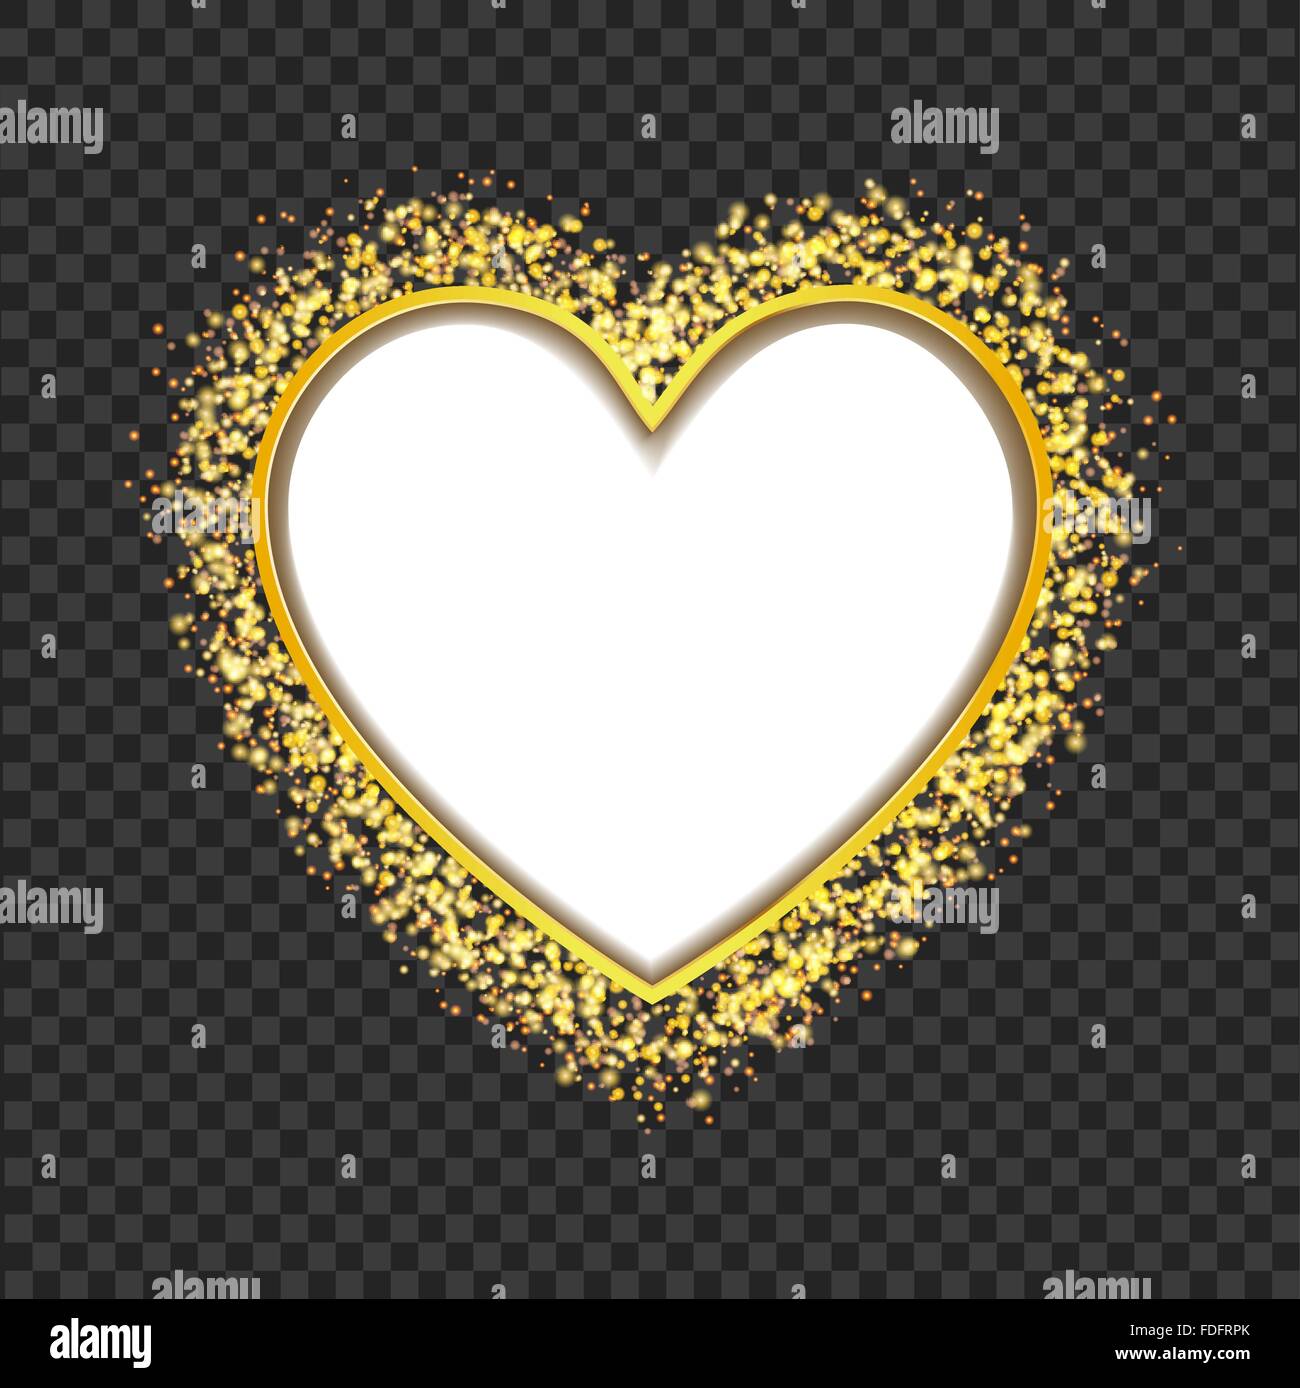 white heart frame with glittering golden transparent particles. vector Stock Vector